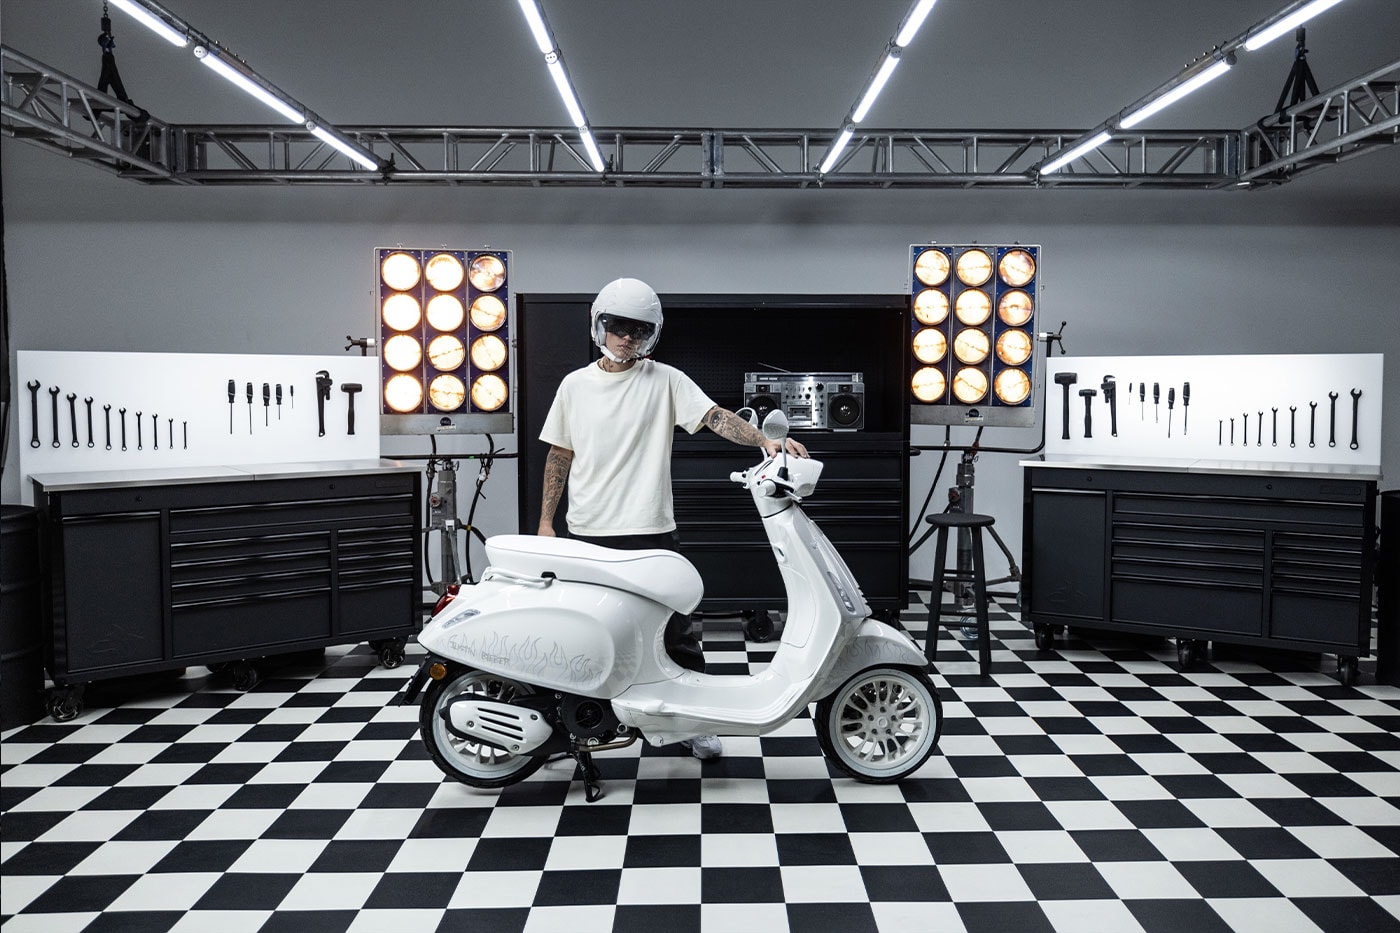 Justin Bieber and Vespa Unveils New Collaborative Model Designed by the Singer peaches justice pop culture giorgio arman chrisian dior sean wotherspon europe moped 